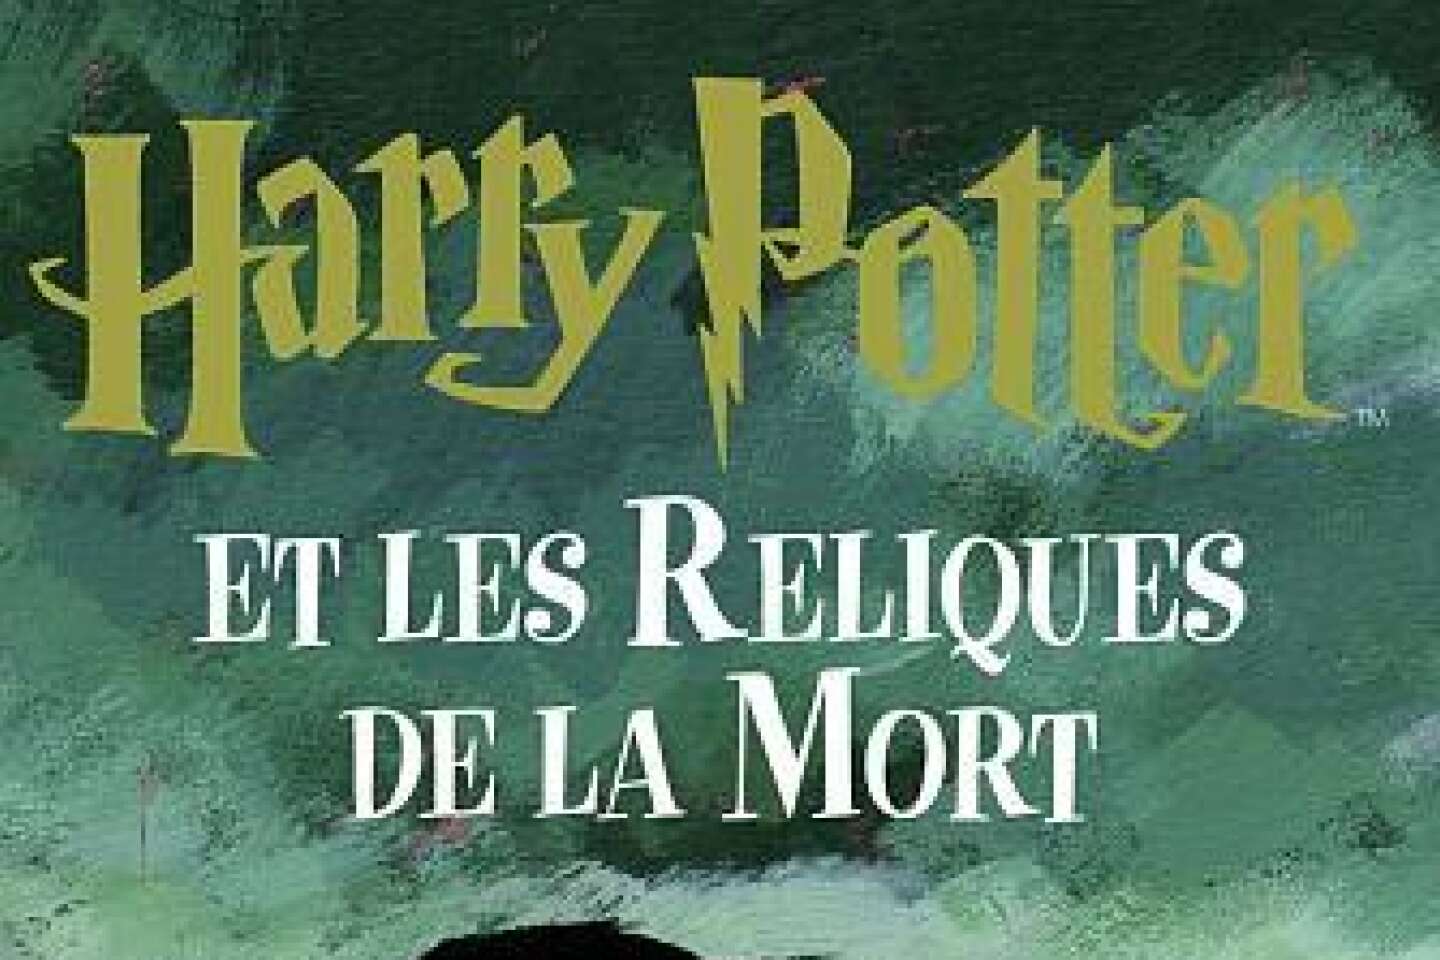 Harry Potter Tome 1 - Cdiscount Librairie